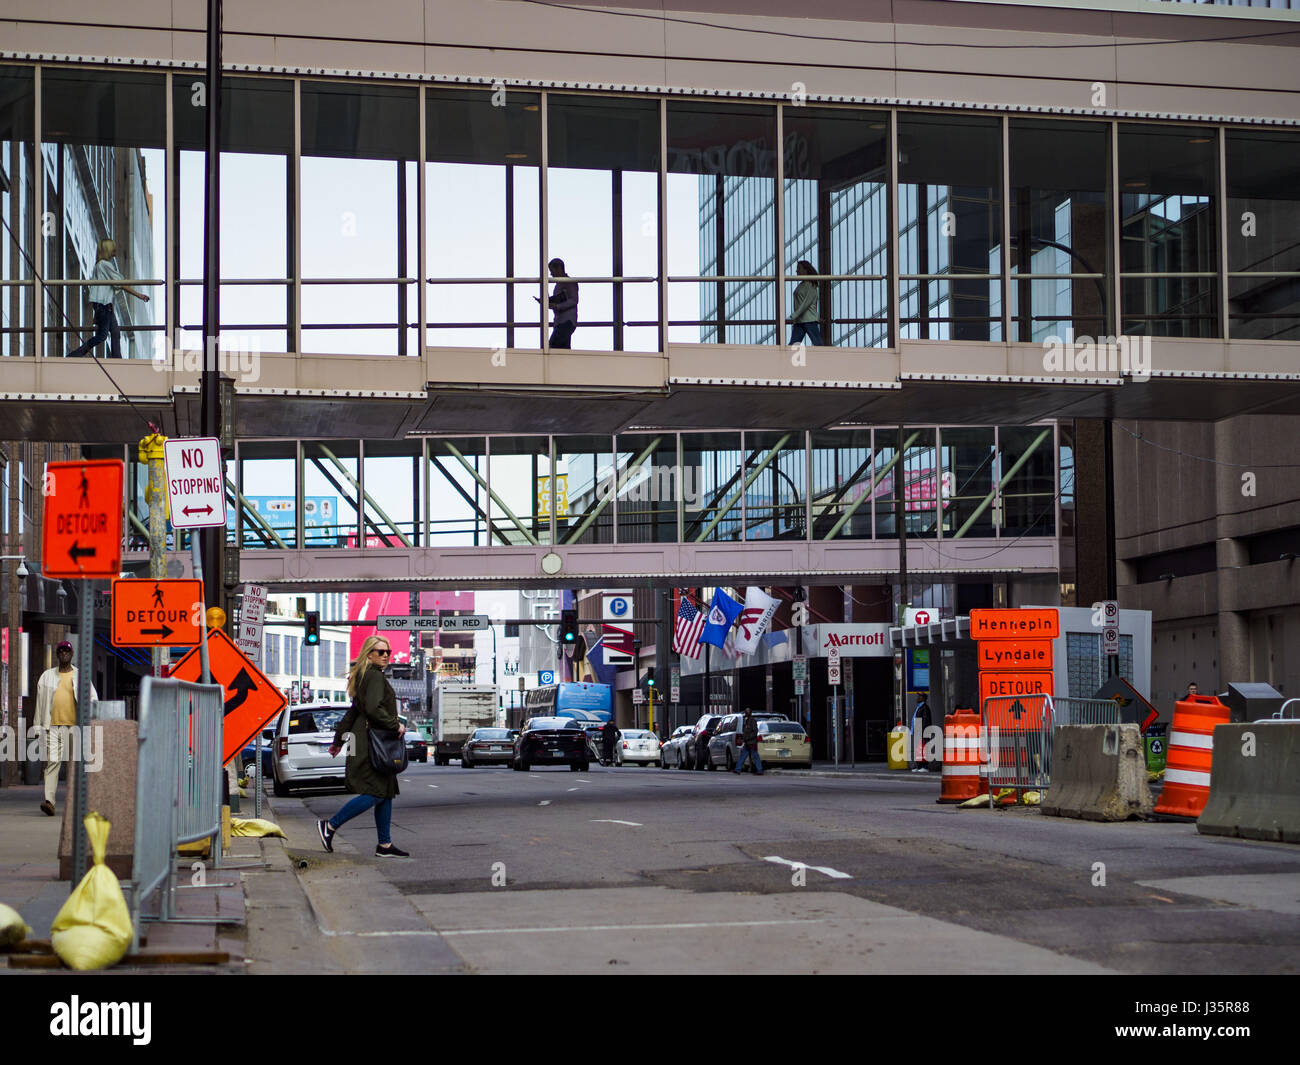 May 3, 2017 - Minneapolis, Minnesota, U.S - Skyways over 7th Street in downtown Minneapolis. The skyways are enclosed pedestrian overpasses that connect downtown buildings. The Minneapolis Skyway was started in the early 1960s as a response to covered shopping malls in the suburbs that were drawing shoppers out of the downtown area. The system grew sporadically until 1974, when the construction of the IDS Center and its center atrium, called the Crystal Court, served as a hub for the downtown skyway system. There are 8 miles of skyways, connecting most of the downtown buildings from Target Fie Stock Photo